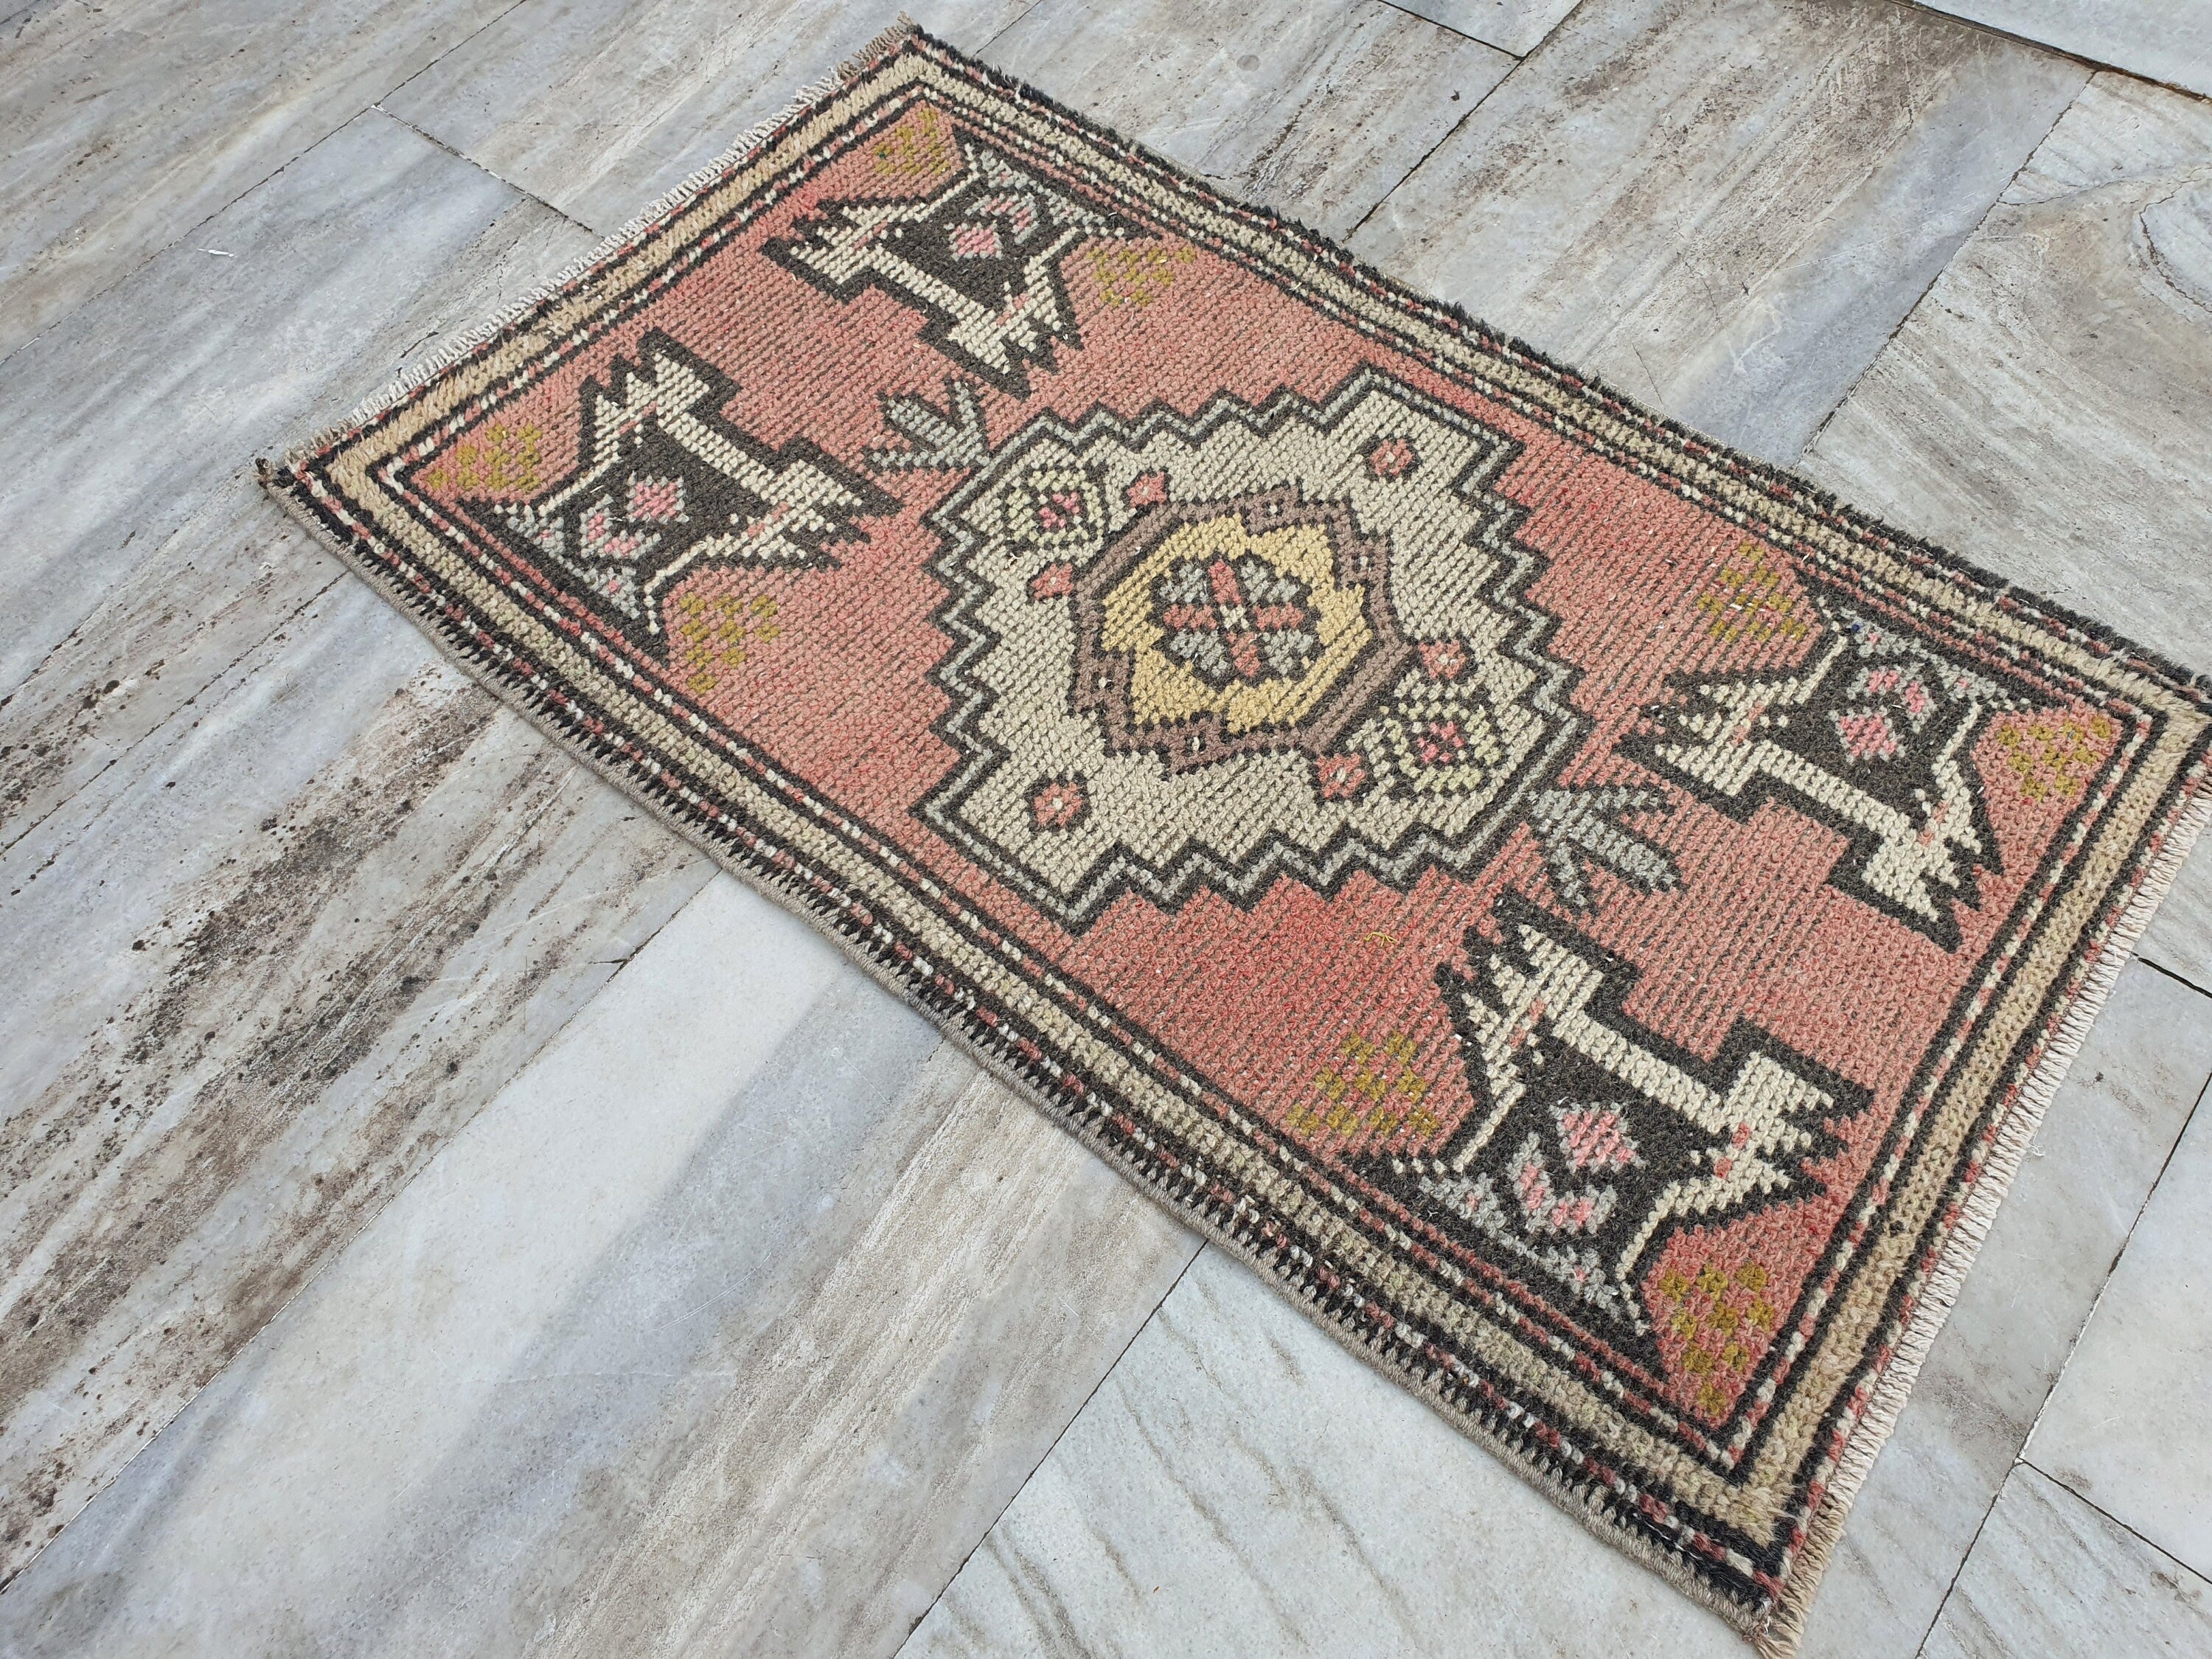 Small Turkish Rug, 2 ft 9 in x 1 ft 7 in, Pink, Green/Grey and Beige Faded Distressed Antique Style Mat